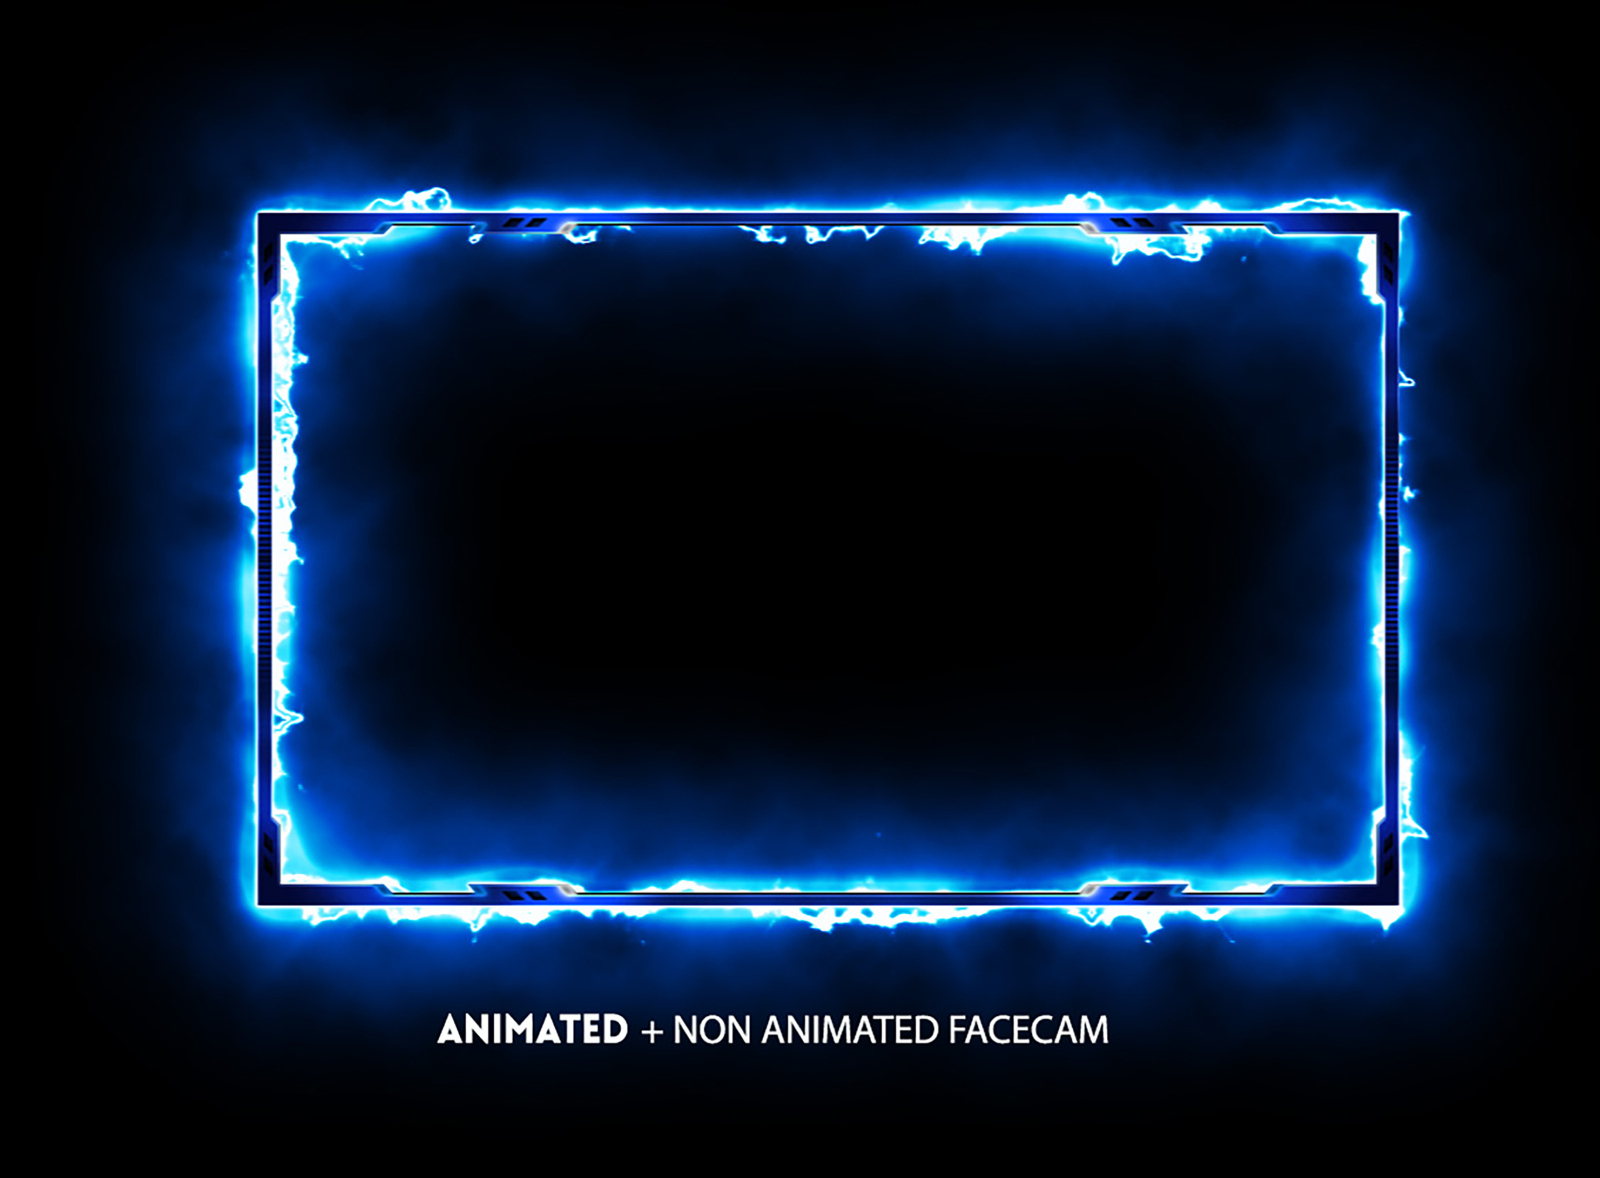 Animated Twitch Facecam Stream Facecam Overlays By Moditha Damindu On